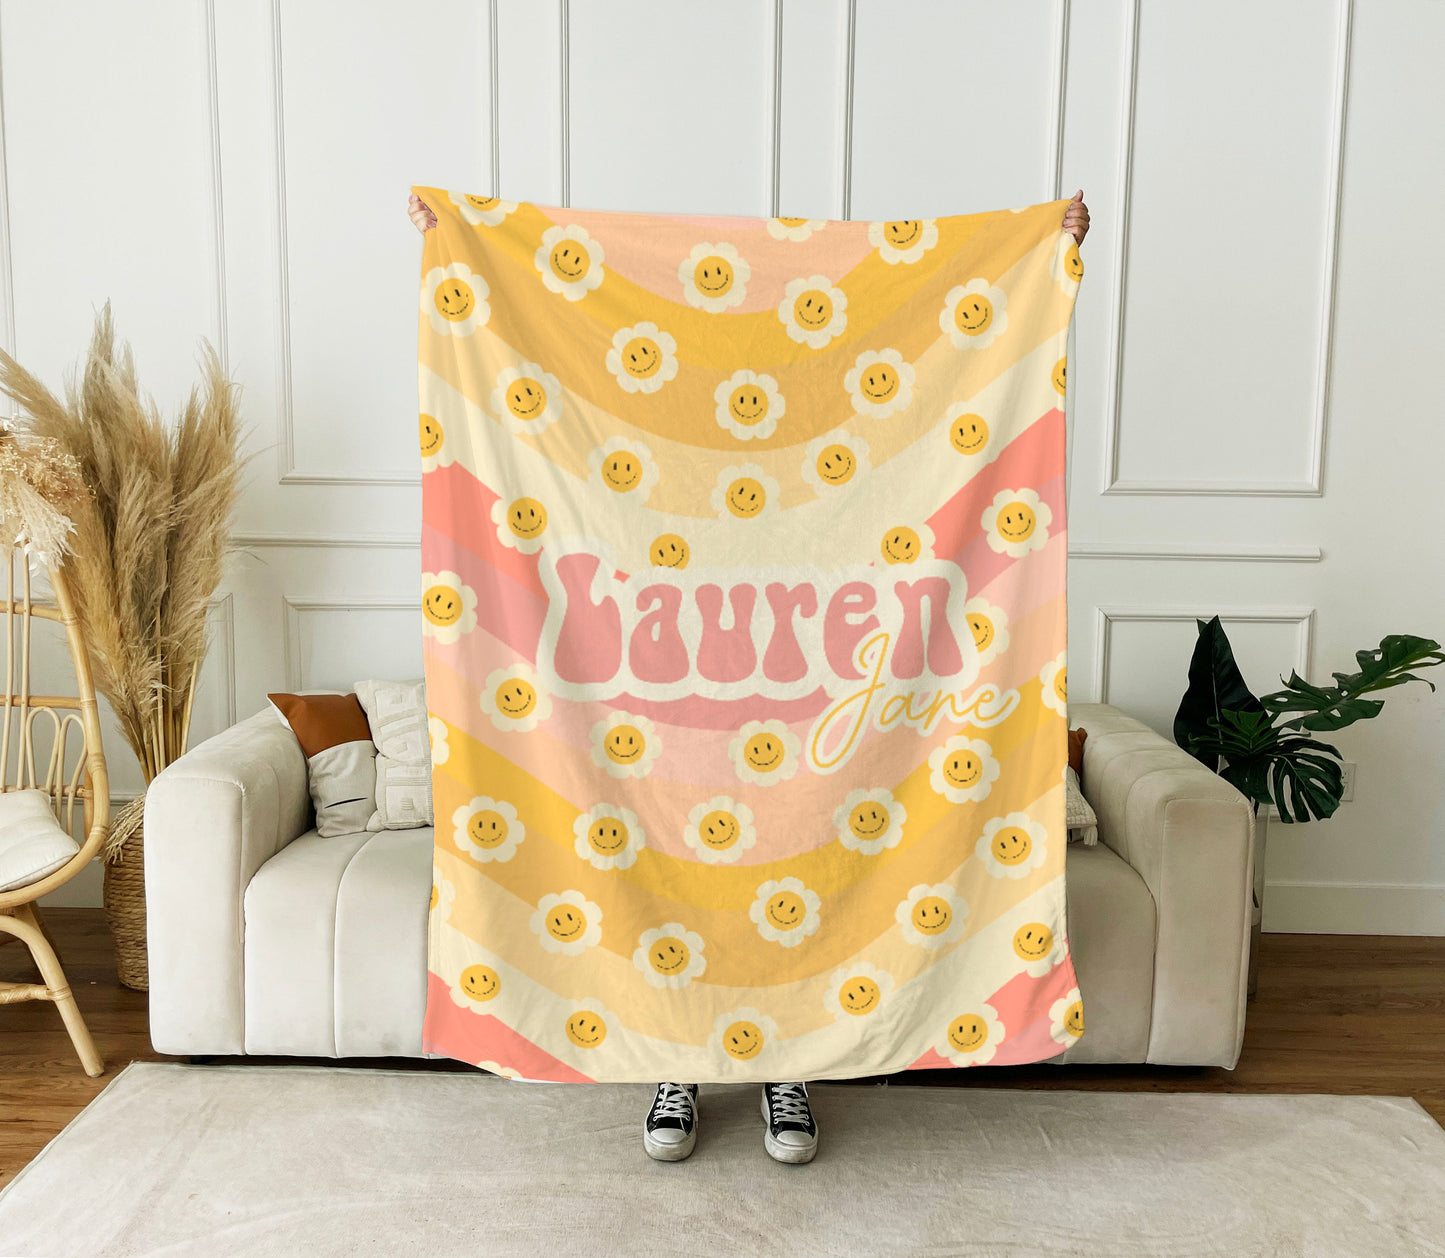 Personalized NEW Style Pattern in vintage rustic style blanket with Name, Custom blanket gift, Birthday Anniversary Gift